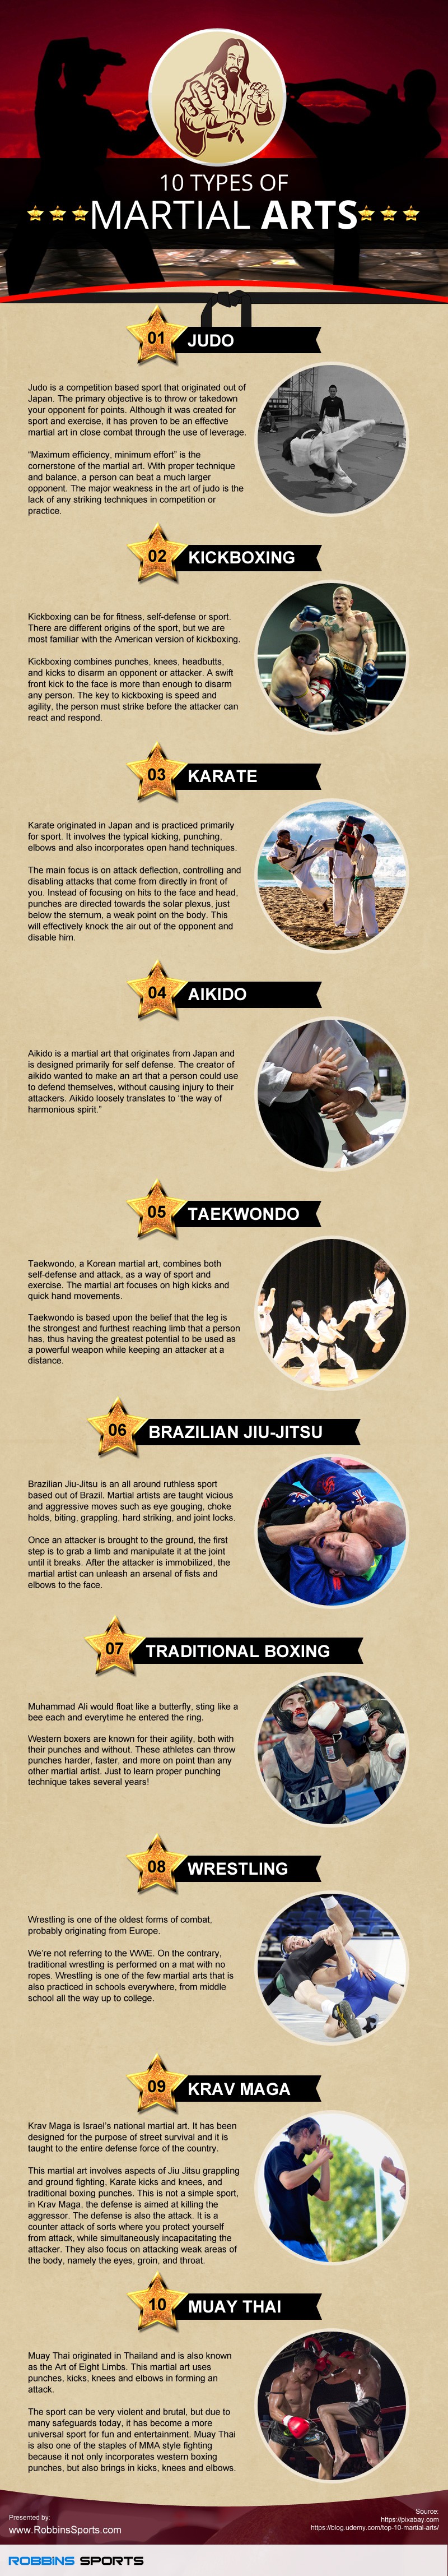 10 Types of Martial Arts #Infographic - Visualistan